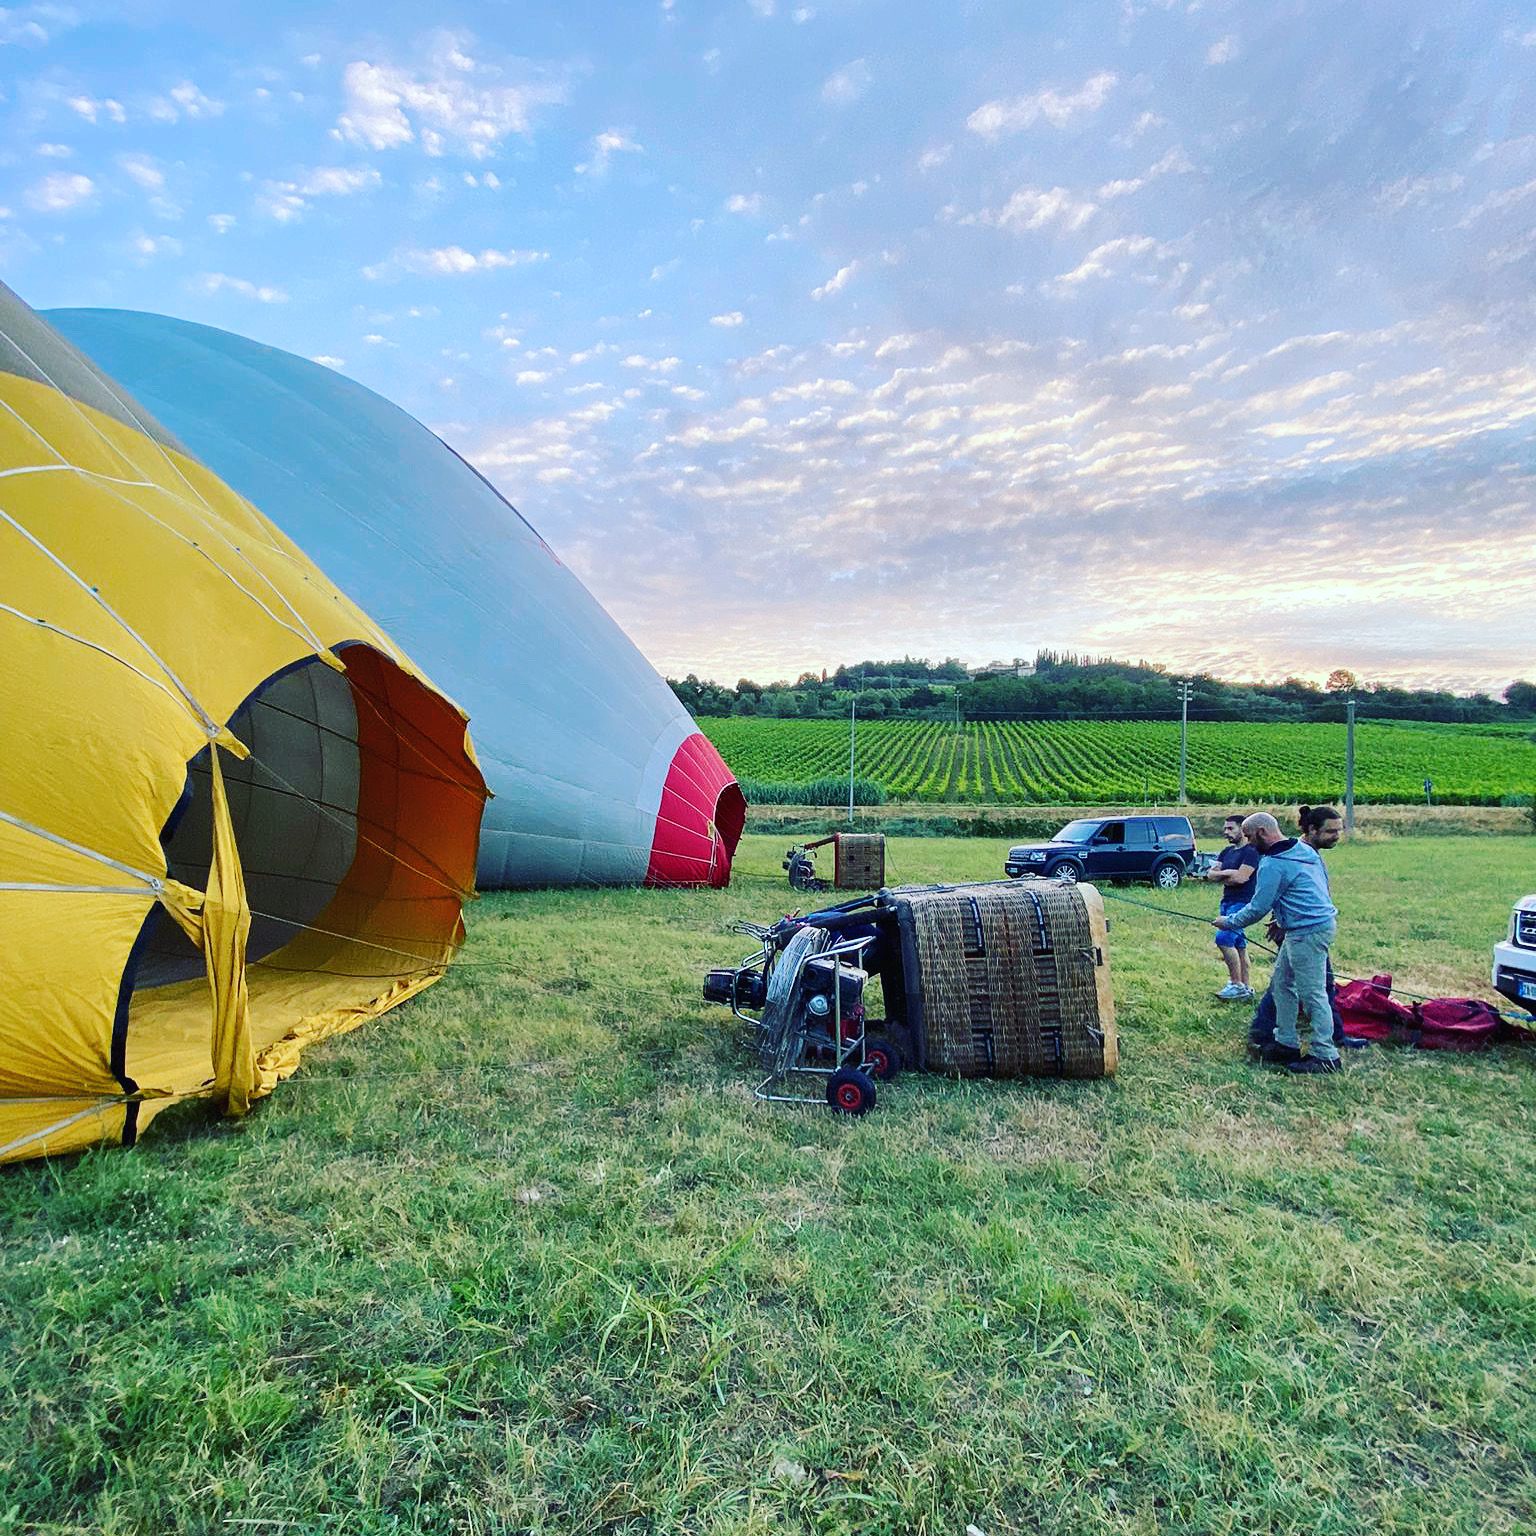 A behind the scenes look at the preparation for a hot air balloon flight